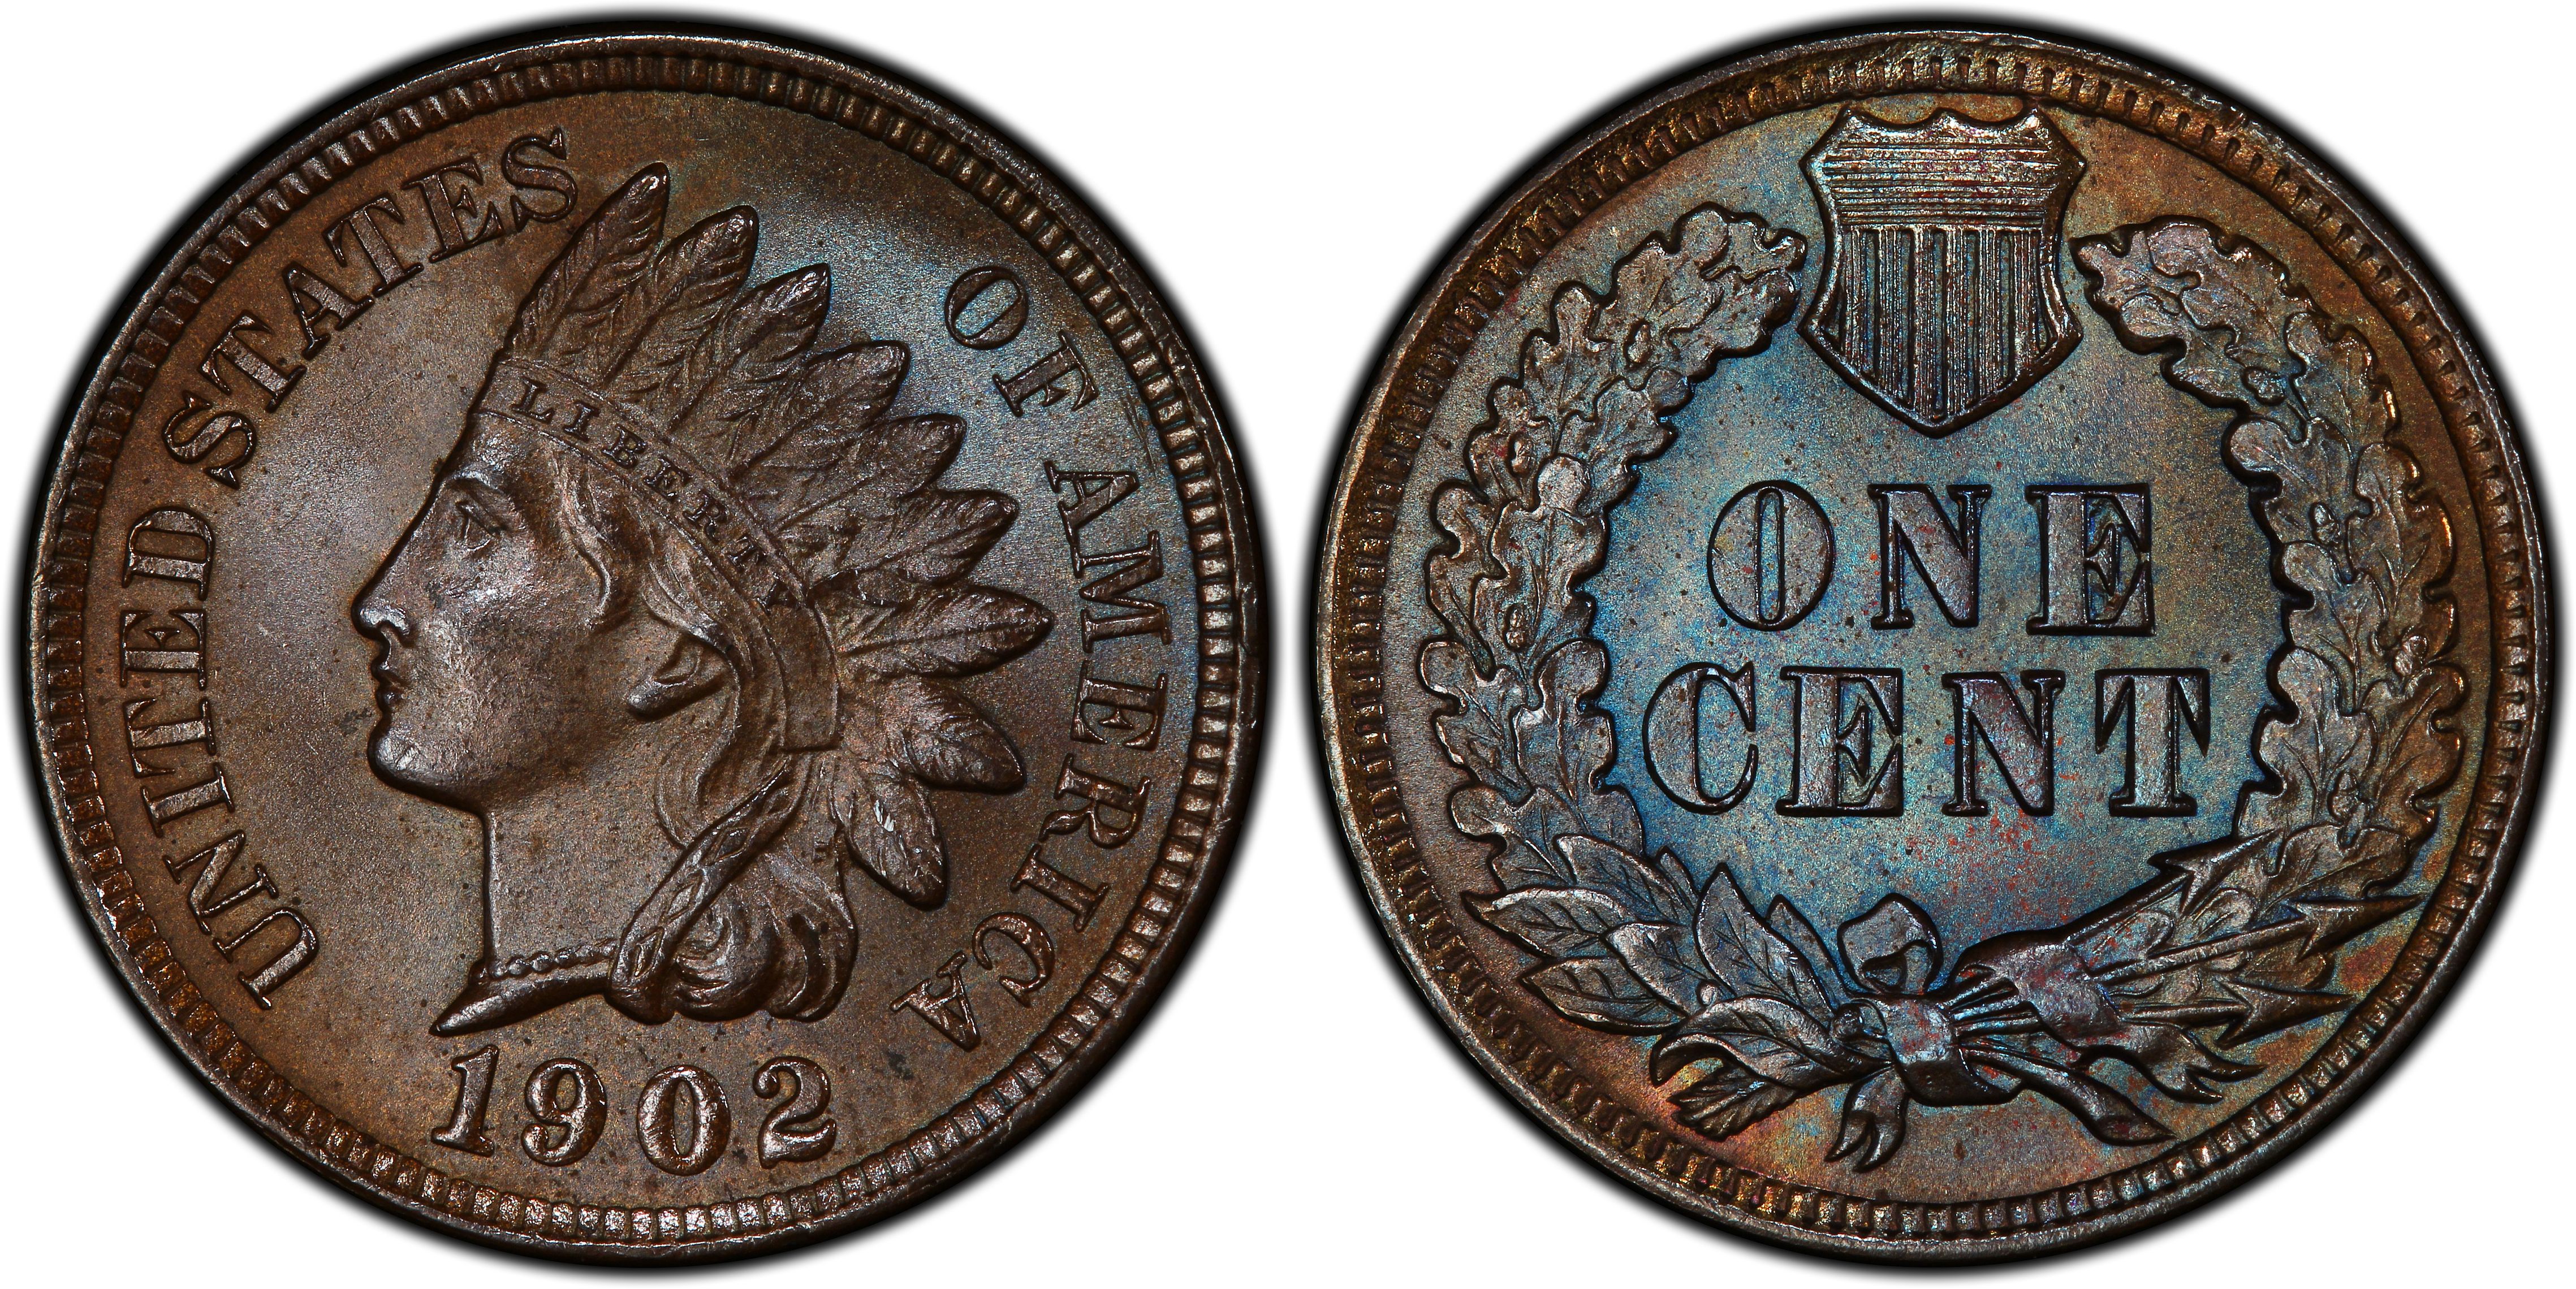 1902 1C, BN (Regular Strike) Indian Cent - PCGS CoinFacts